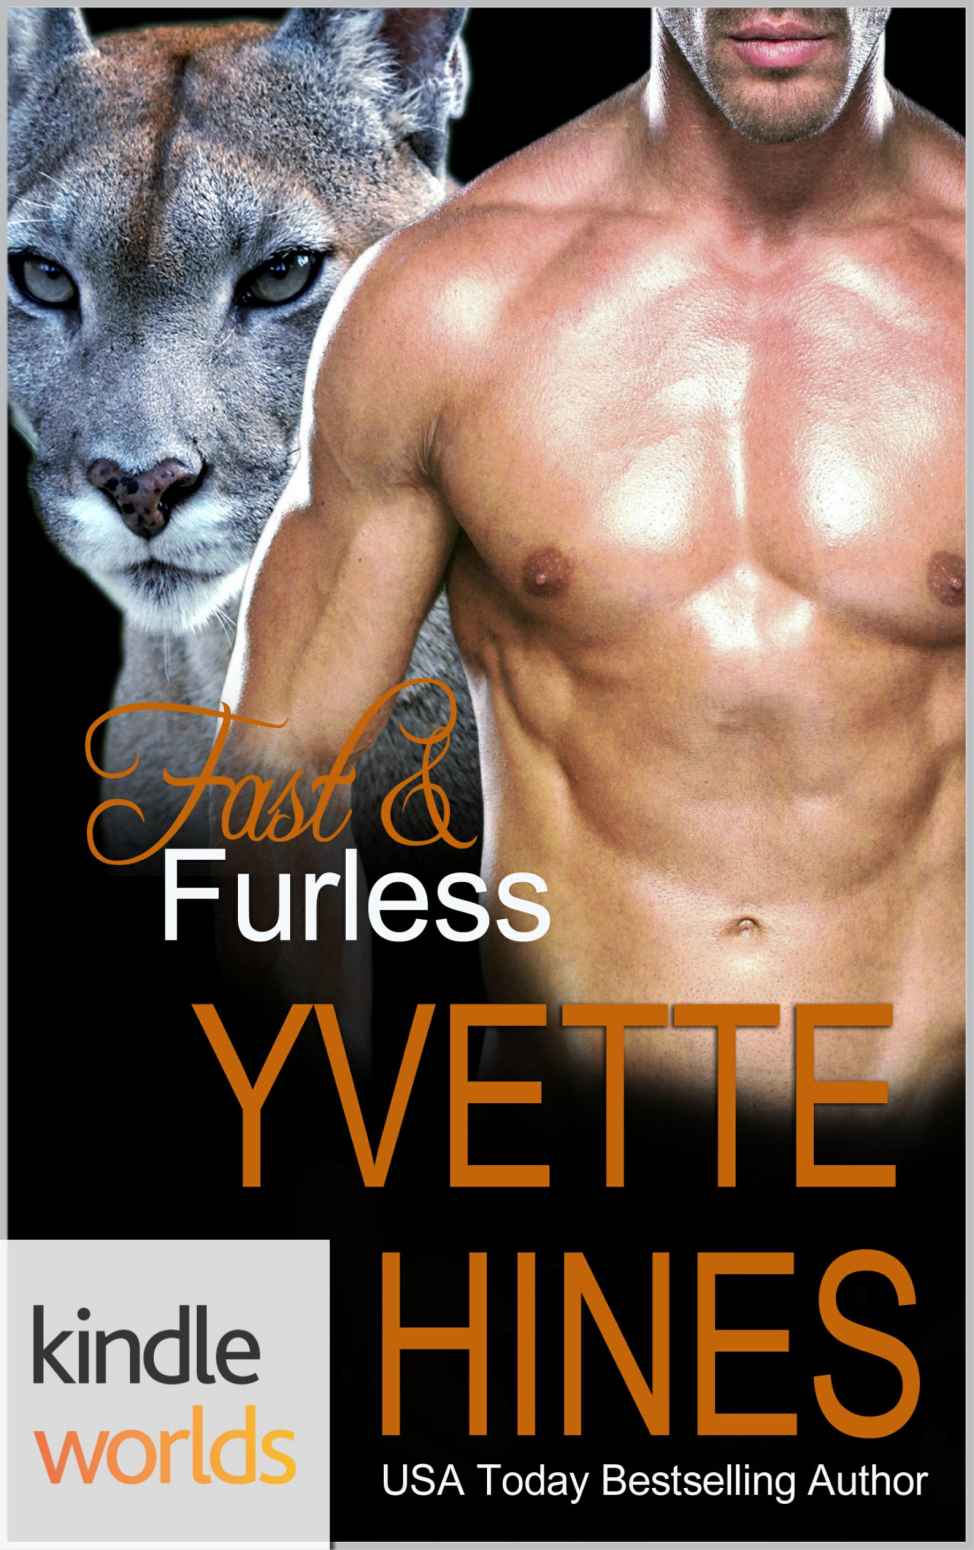 Southern Shifters: Fast & Furless (Kindle Worlds Novella) by Yvette Hines